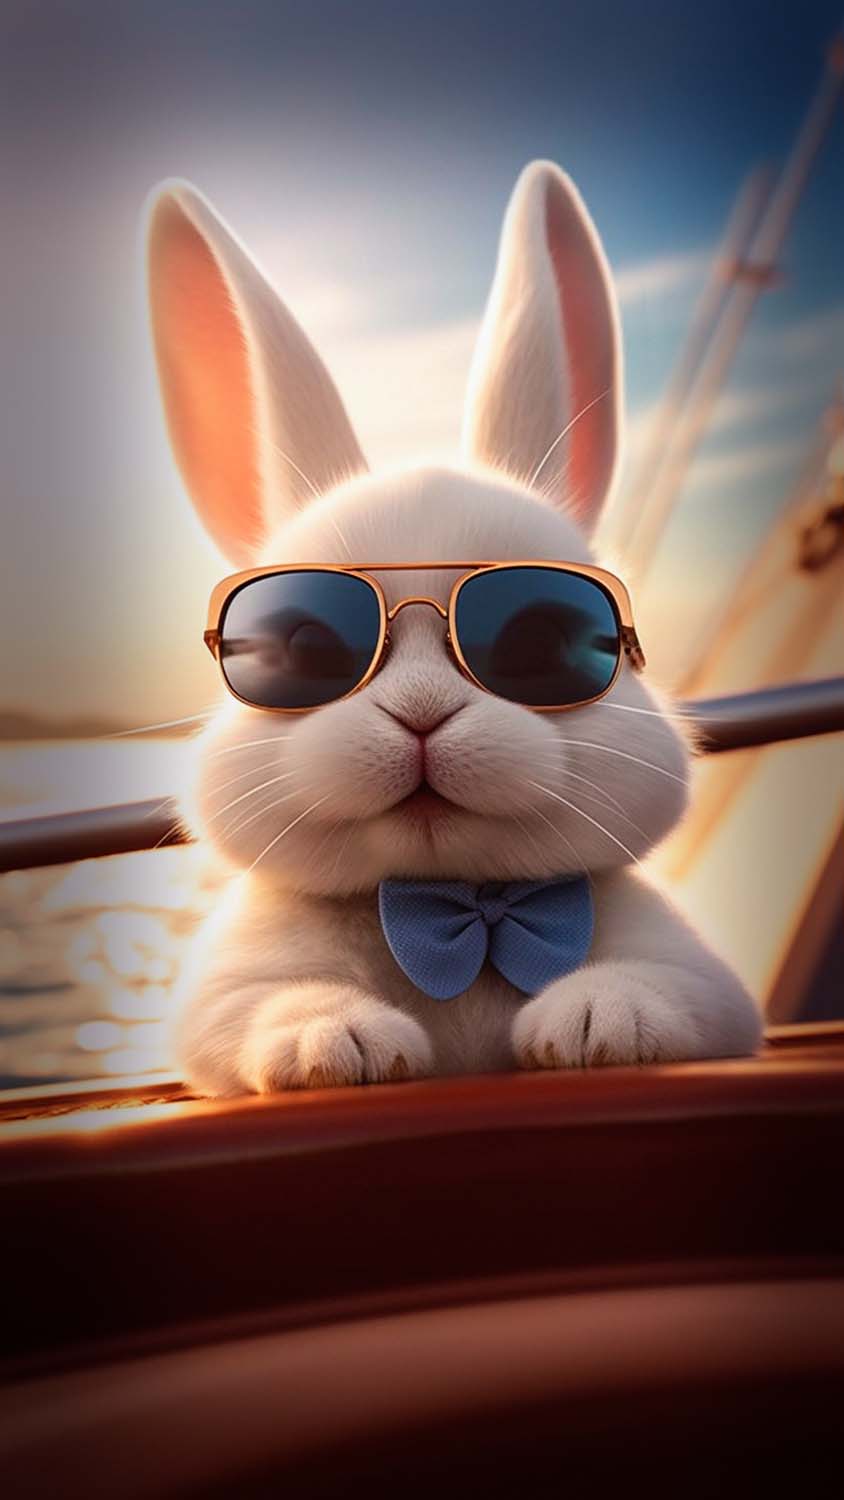 Bugs bunny» 1080P, 2k, 4k HD wallpapers, backgrounds free download | Rare  Gallery